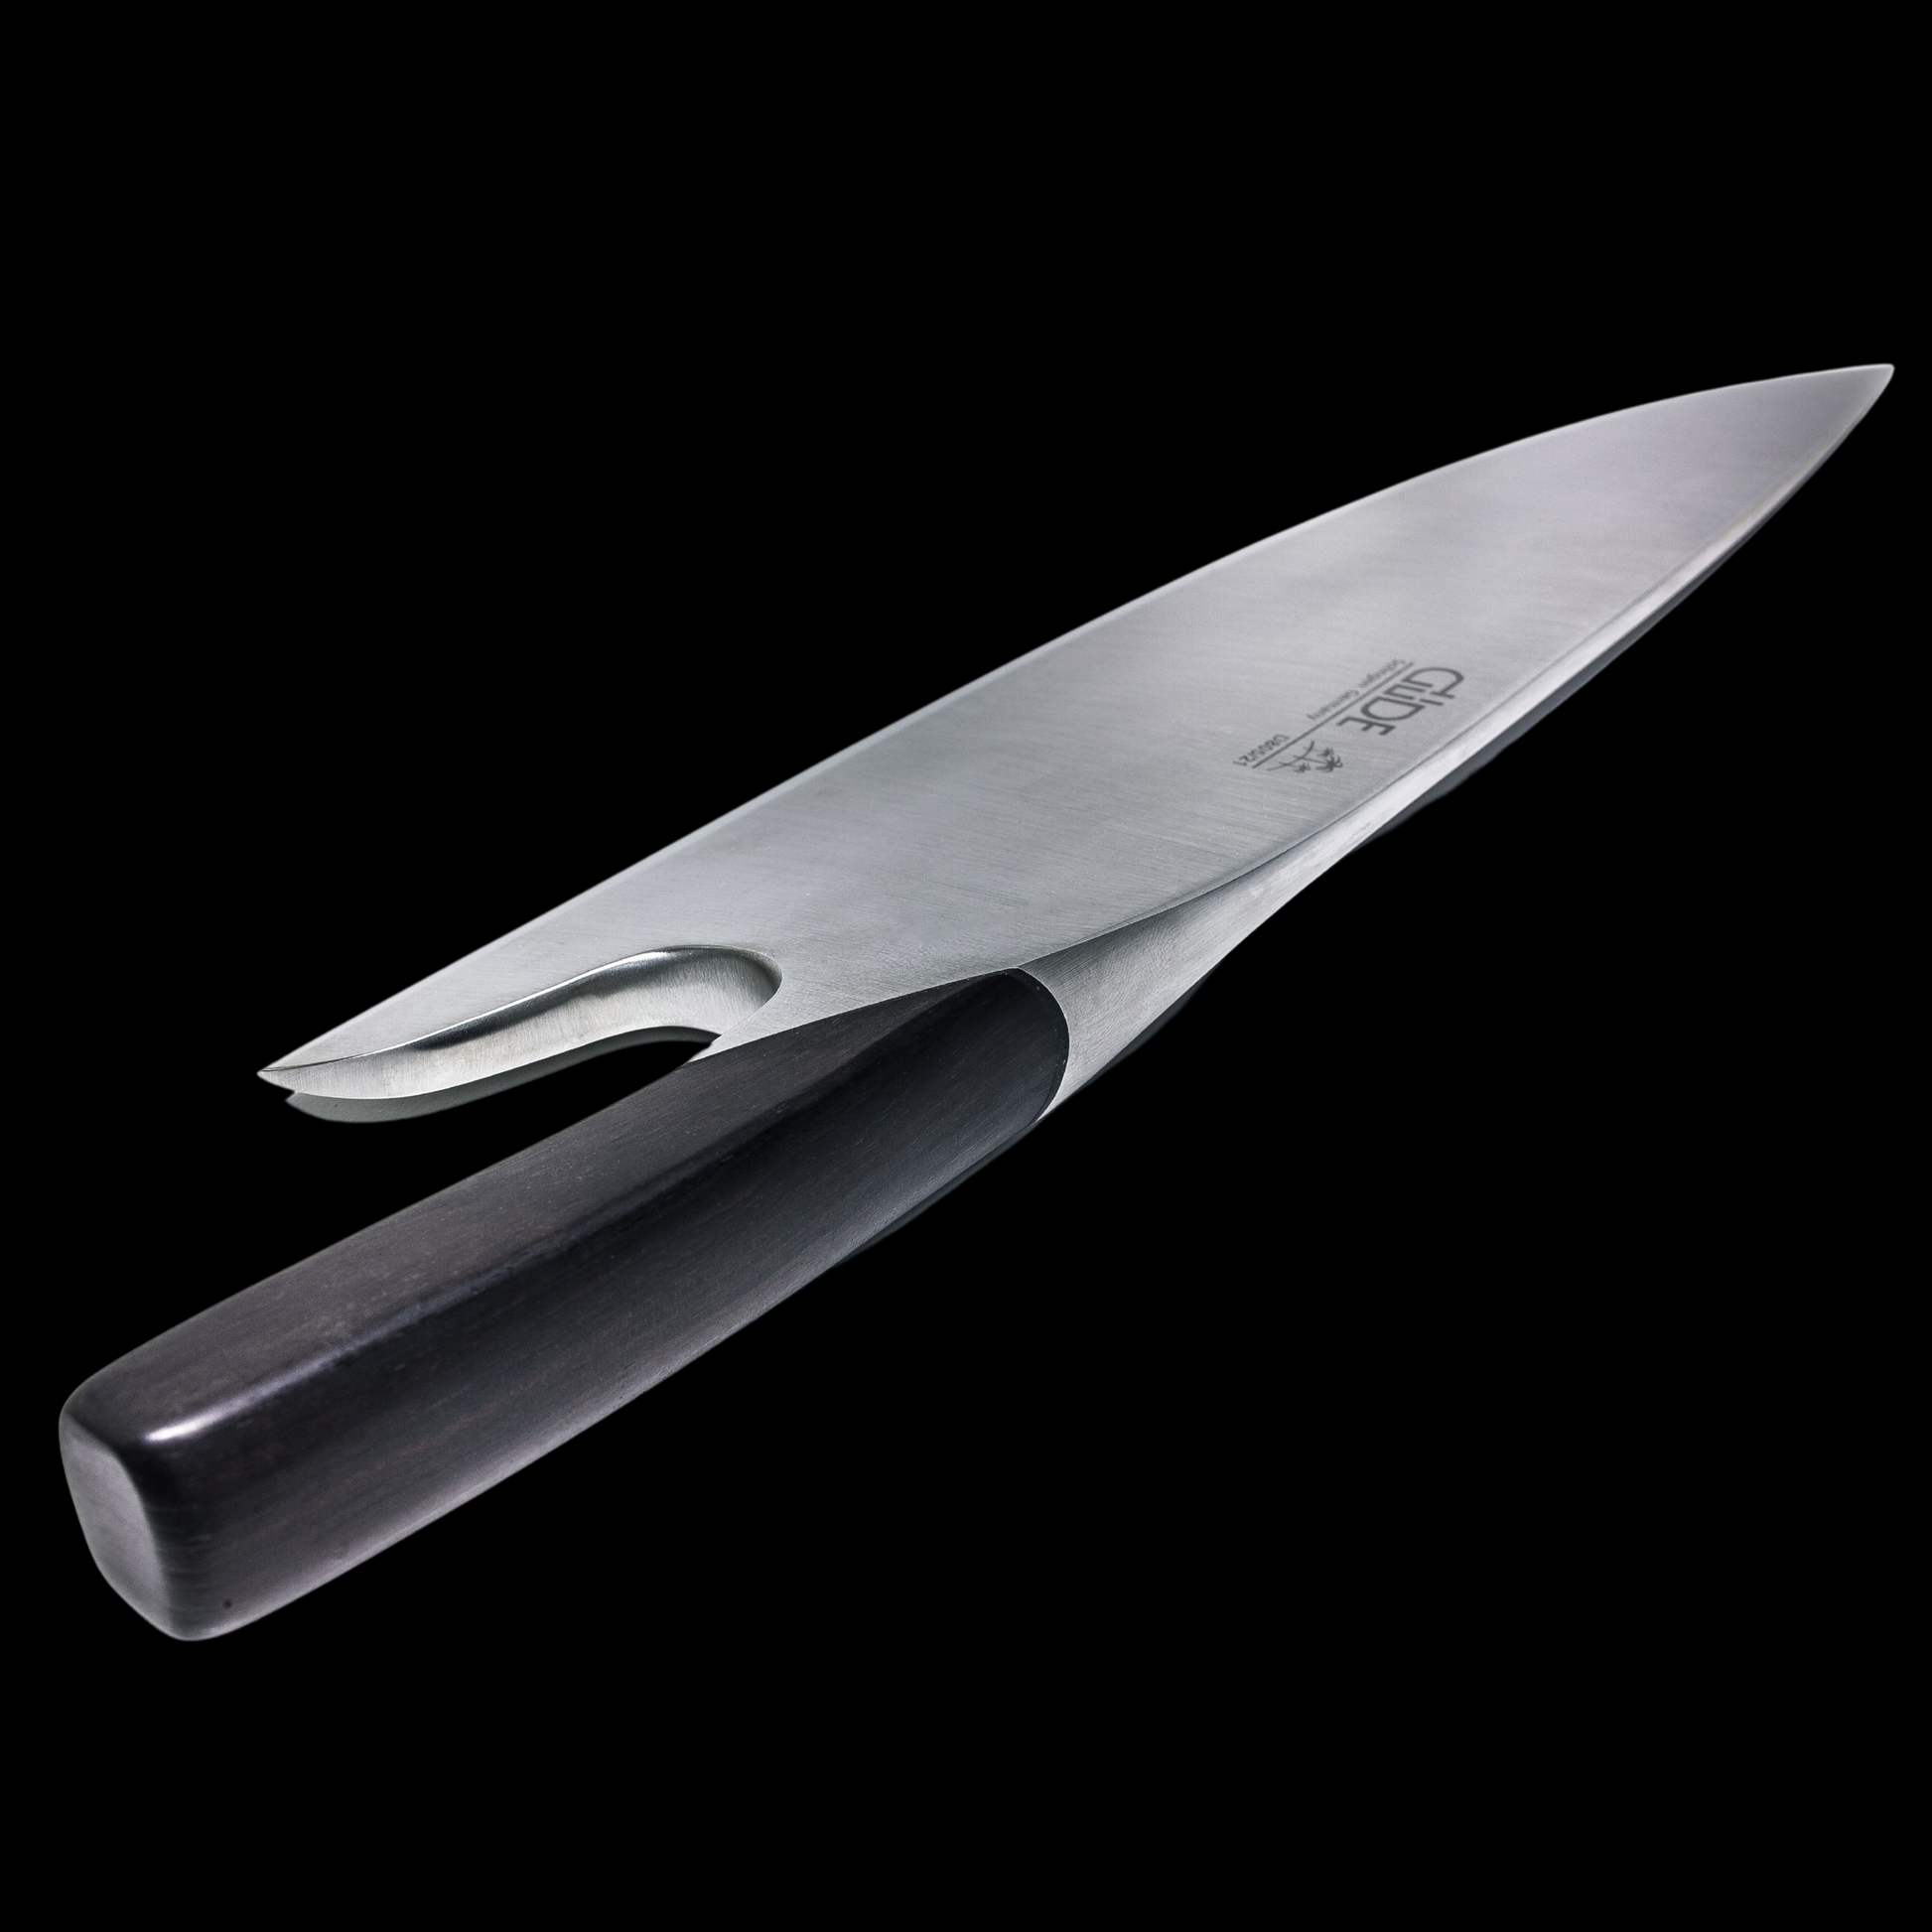 Gude "The Knife" Series Forged Multi-Use Chef's Knife 10", Choice Wood Handle - GuedeUSA